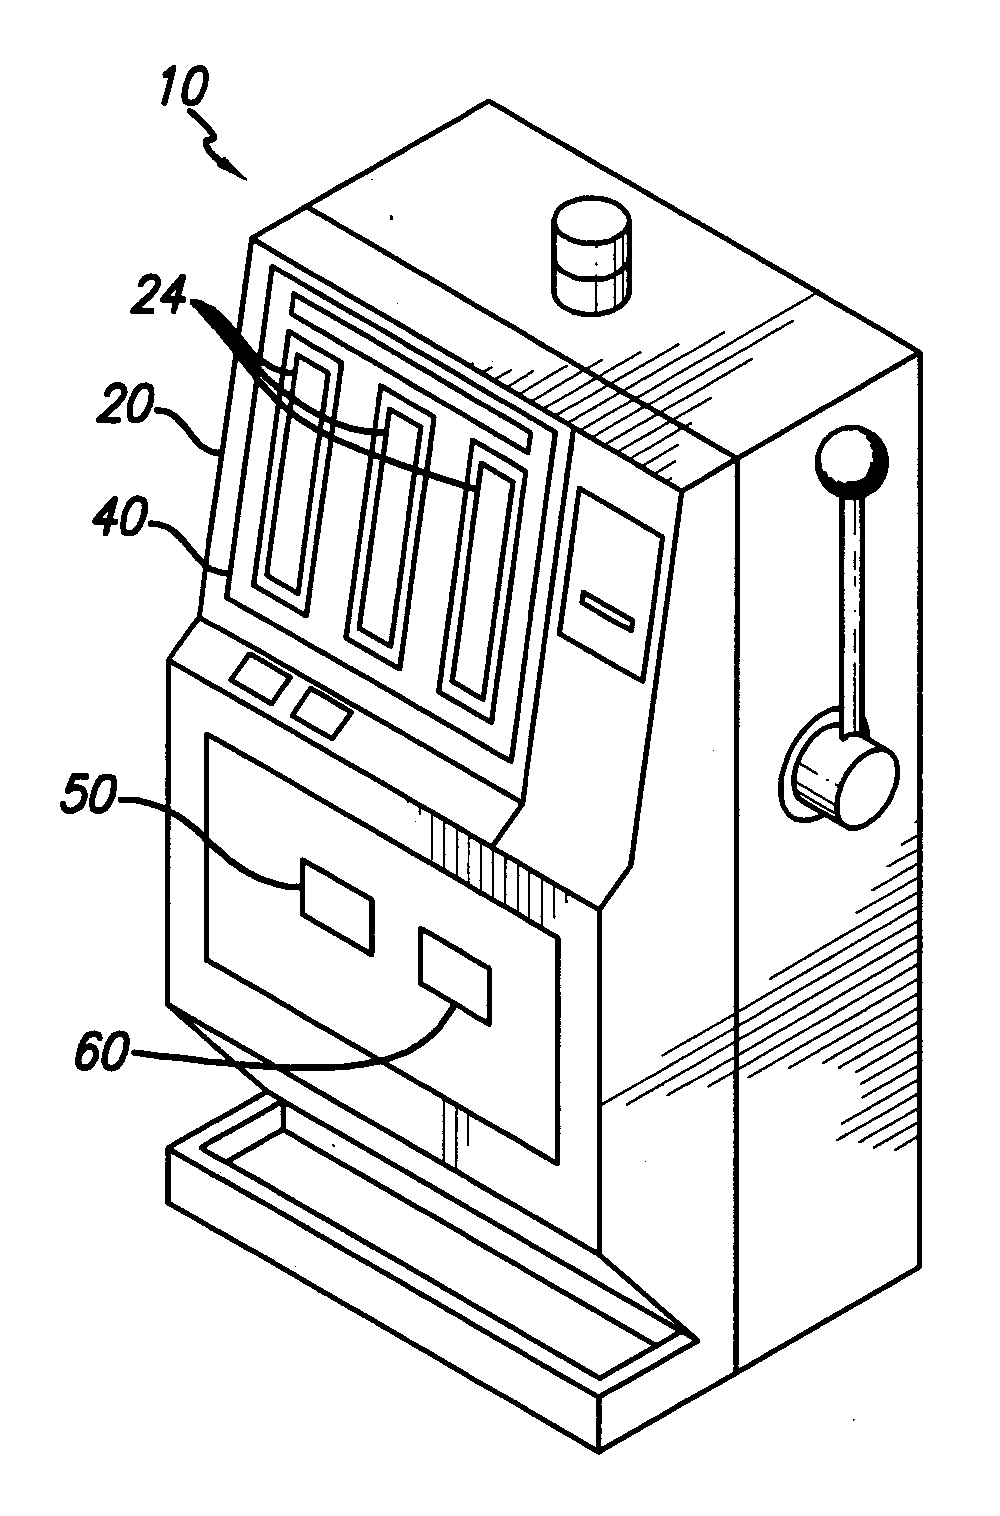 Enhanced mechanical reel gaming system with touch controls